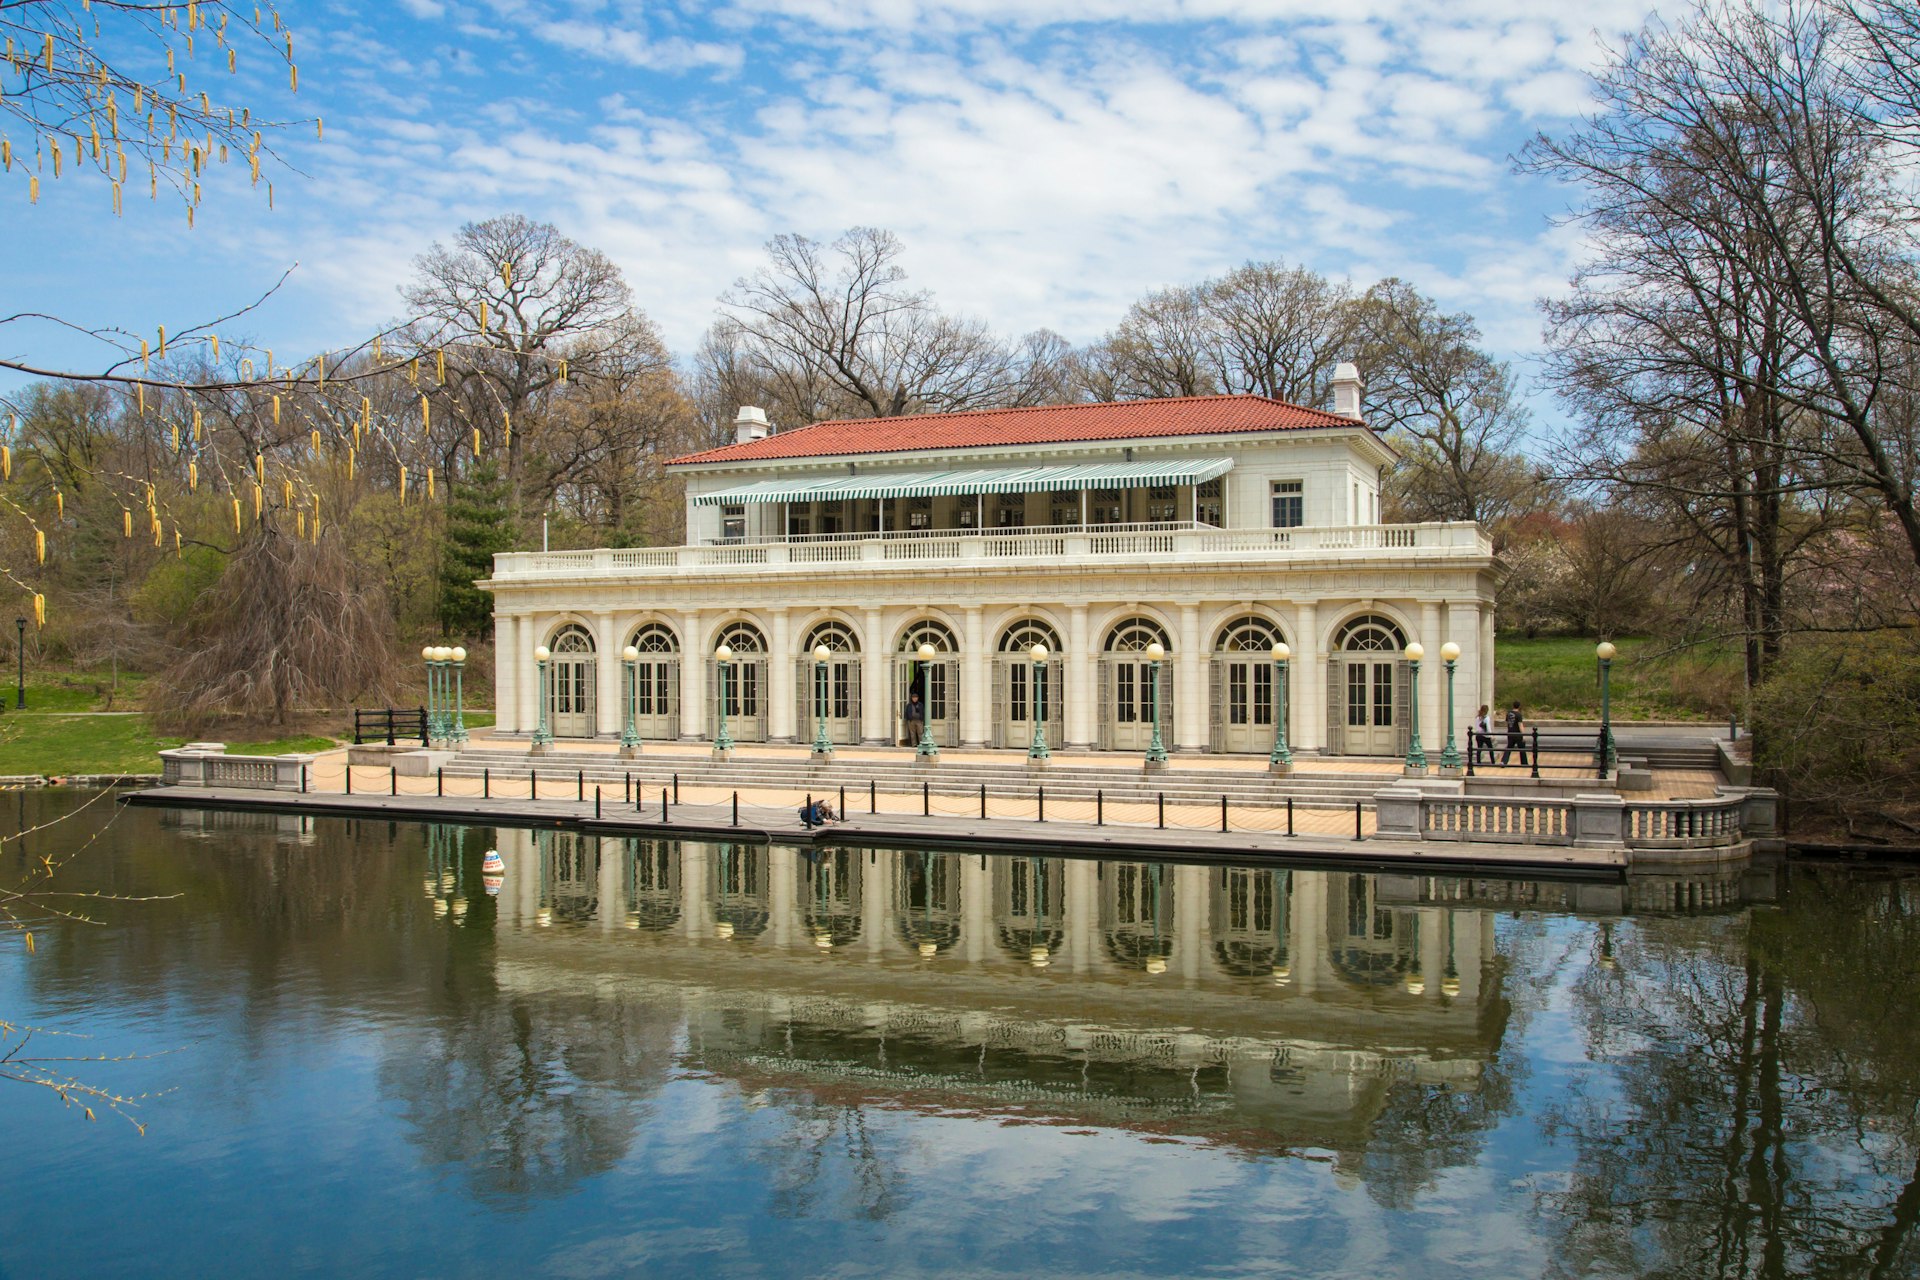 Historic Boathouse on lake at Prospect Park in Brooklyn, NYC. This landmark boathouse was built in 1905